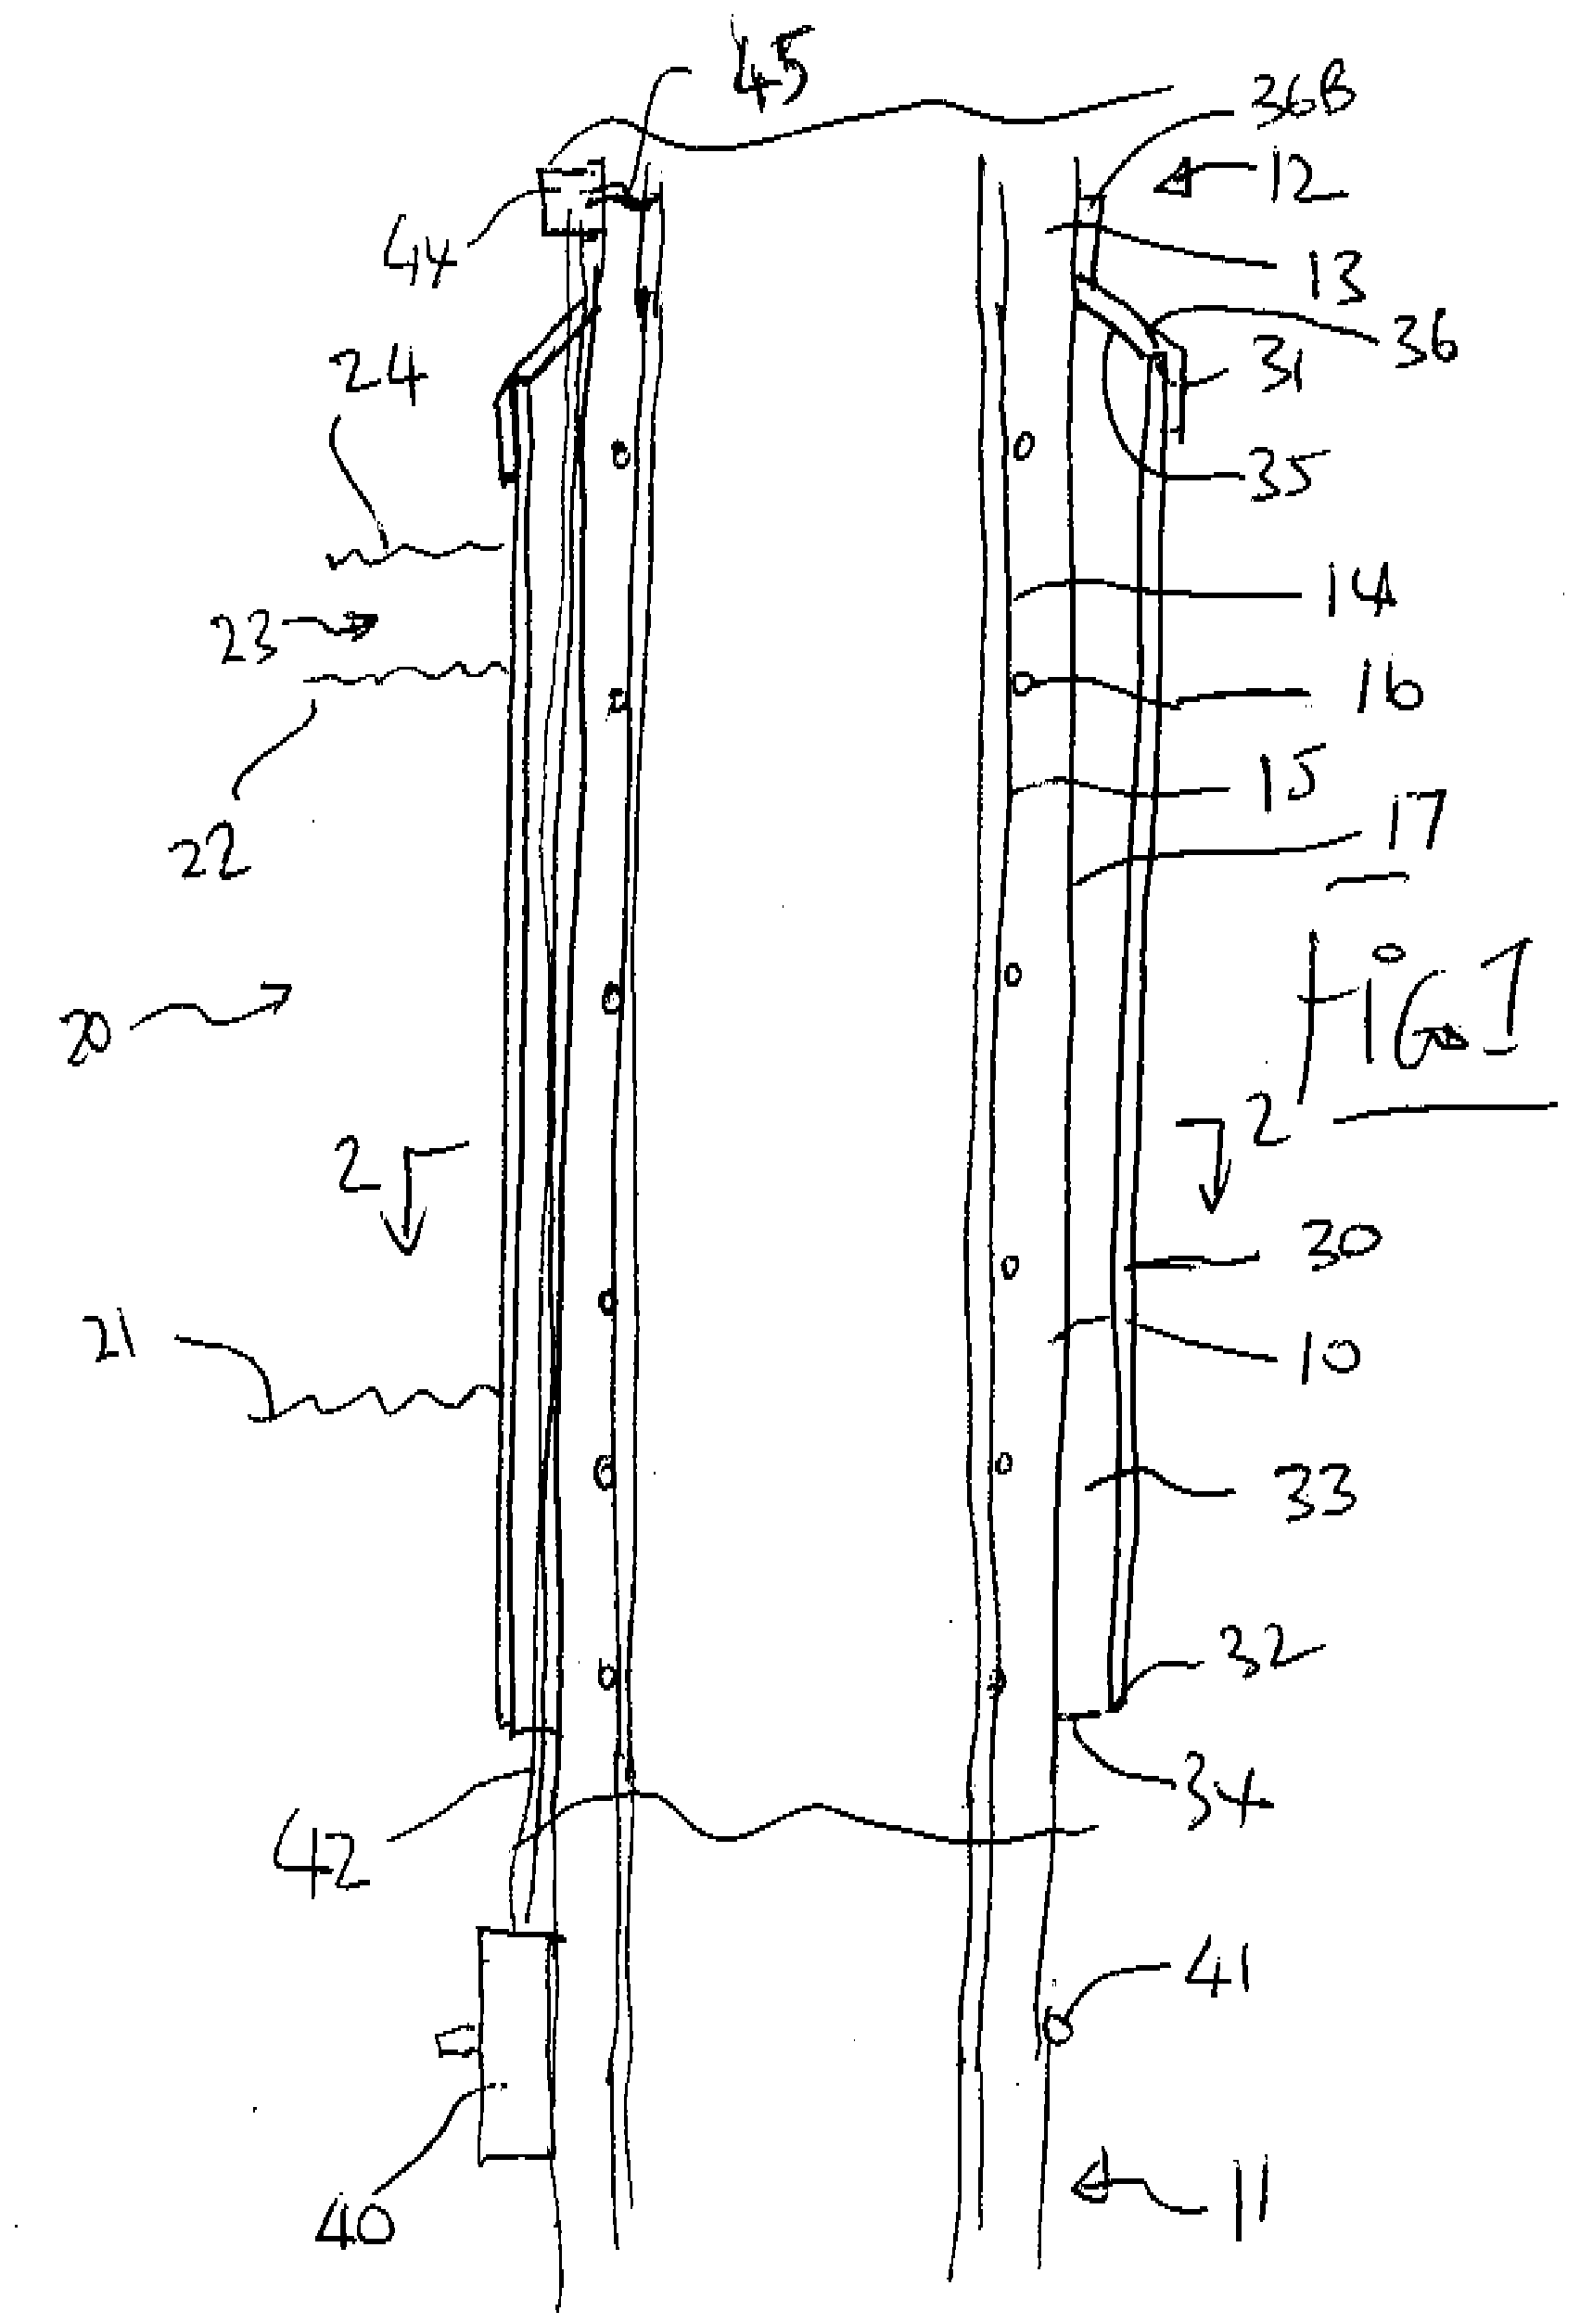 Cathodic protection of a concrete structure having a part in contact with a wetting medium and a part above the medium